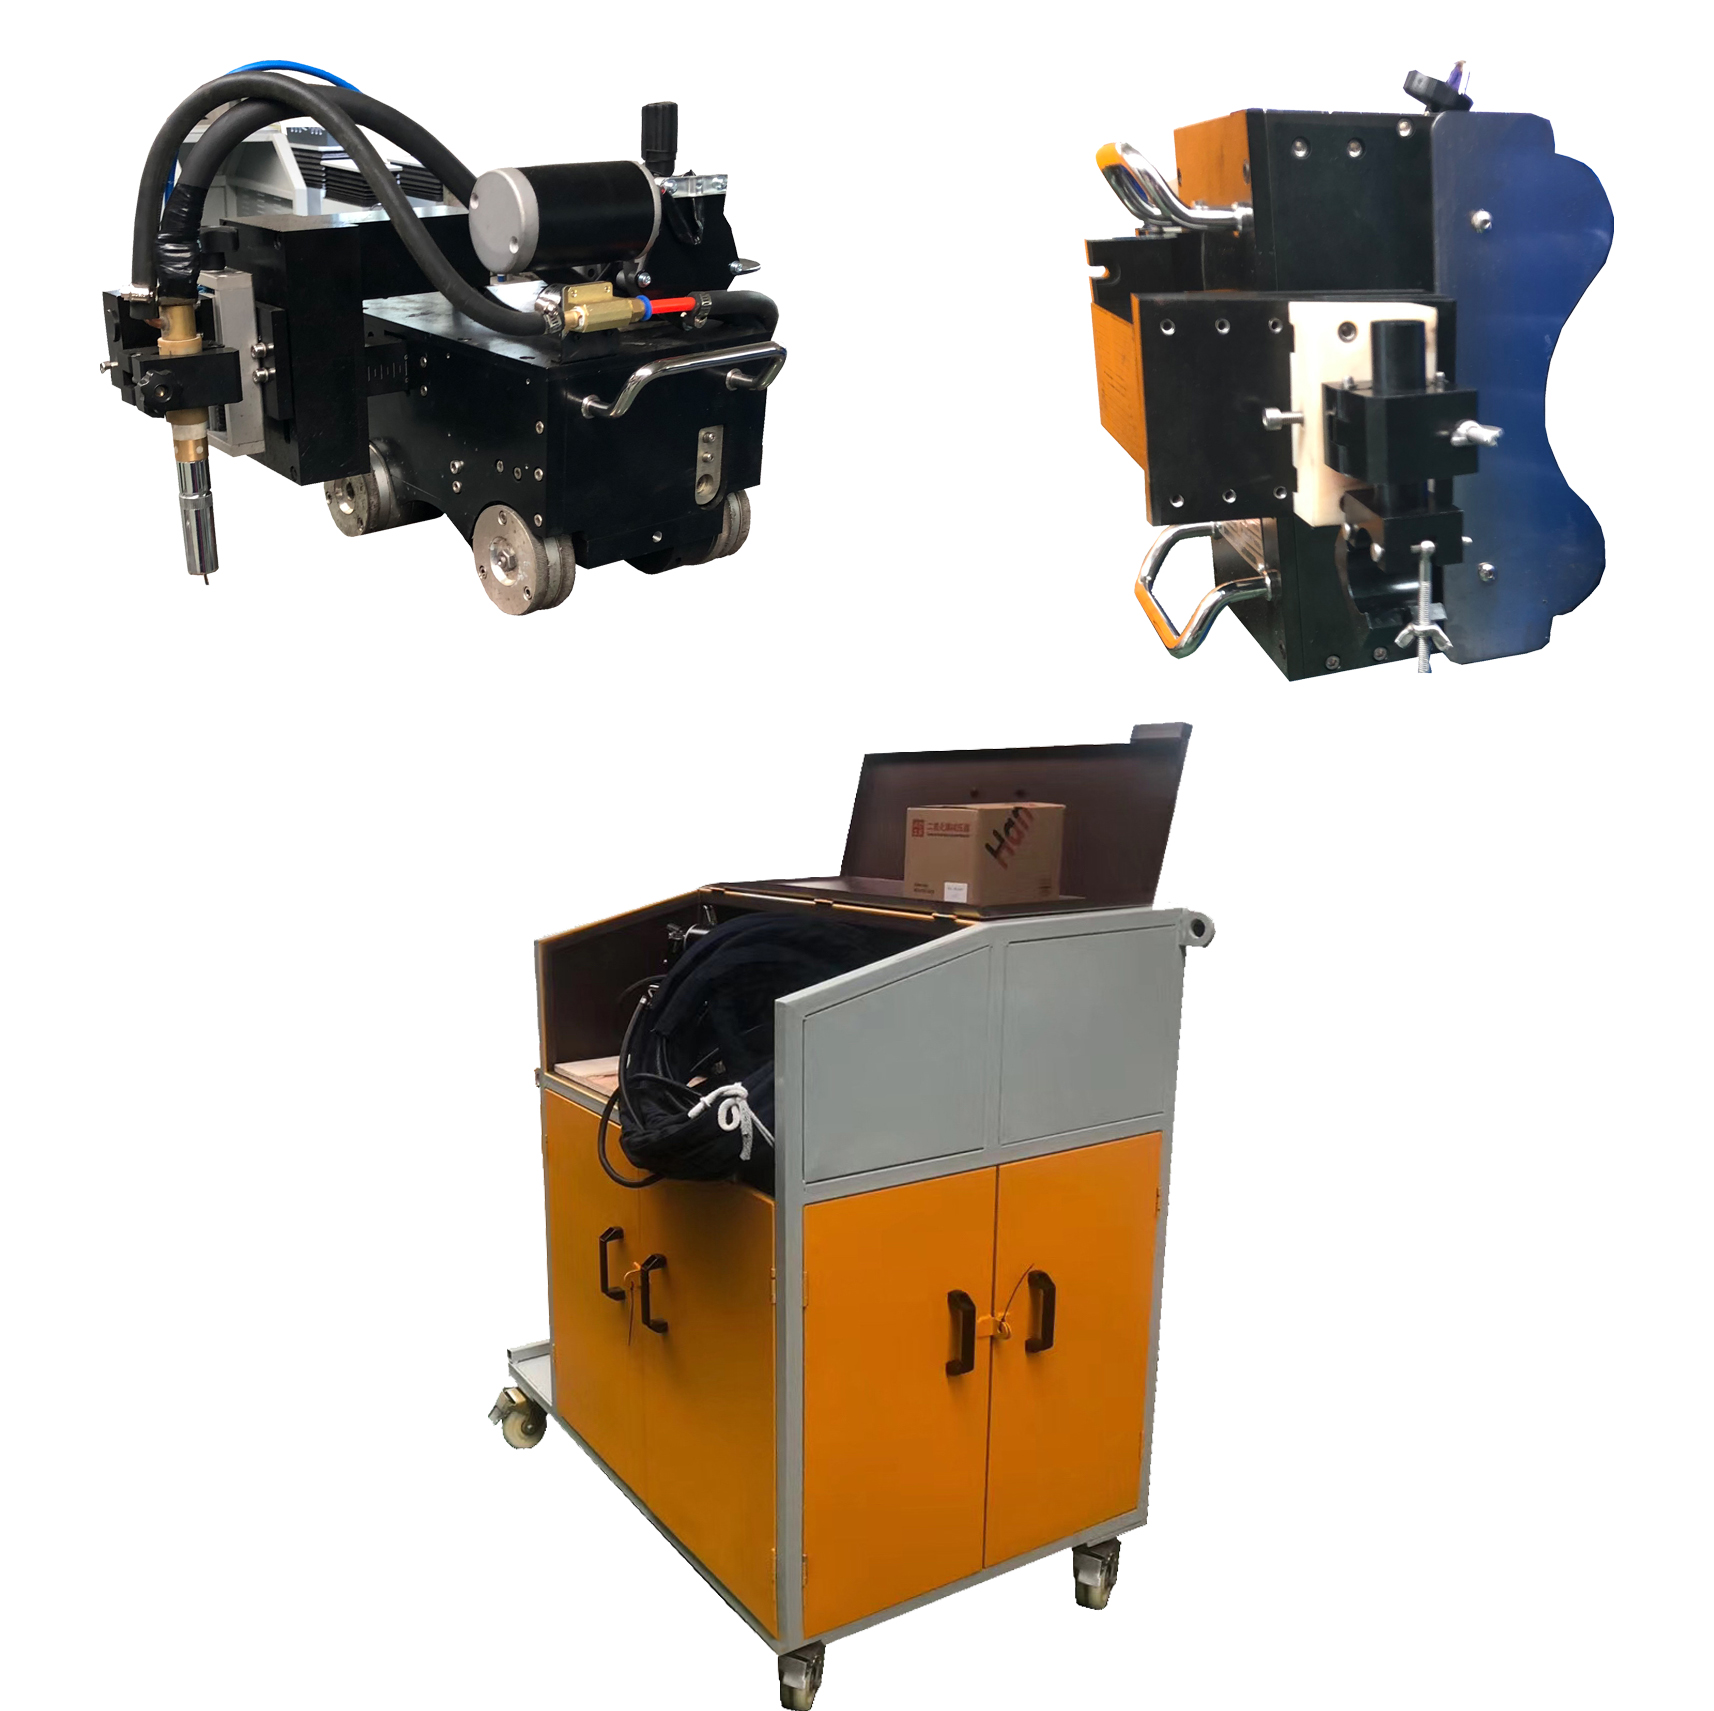 Advanced Pipe Orbital Welding Machine for Pipeline Construction Machinery